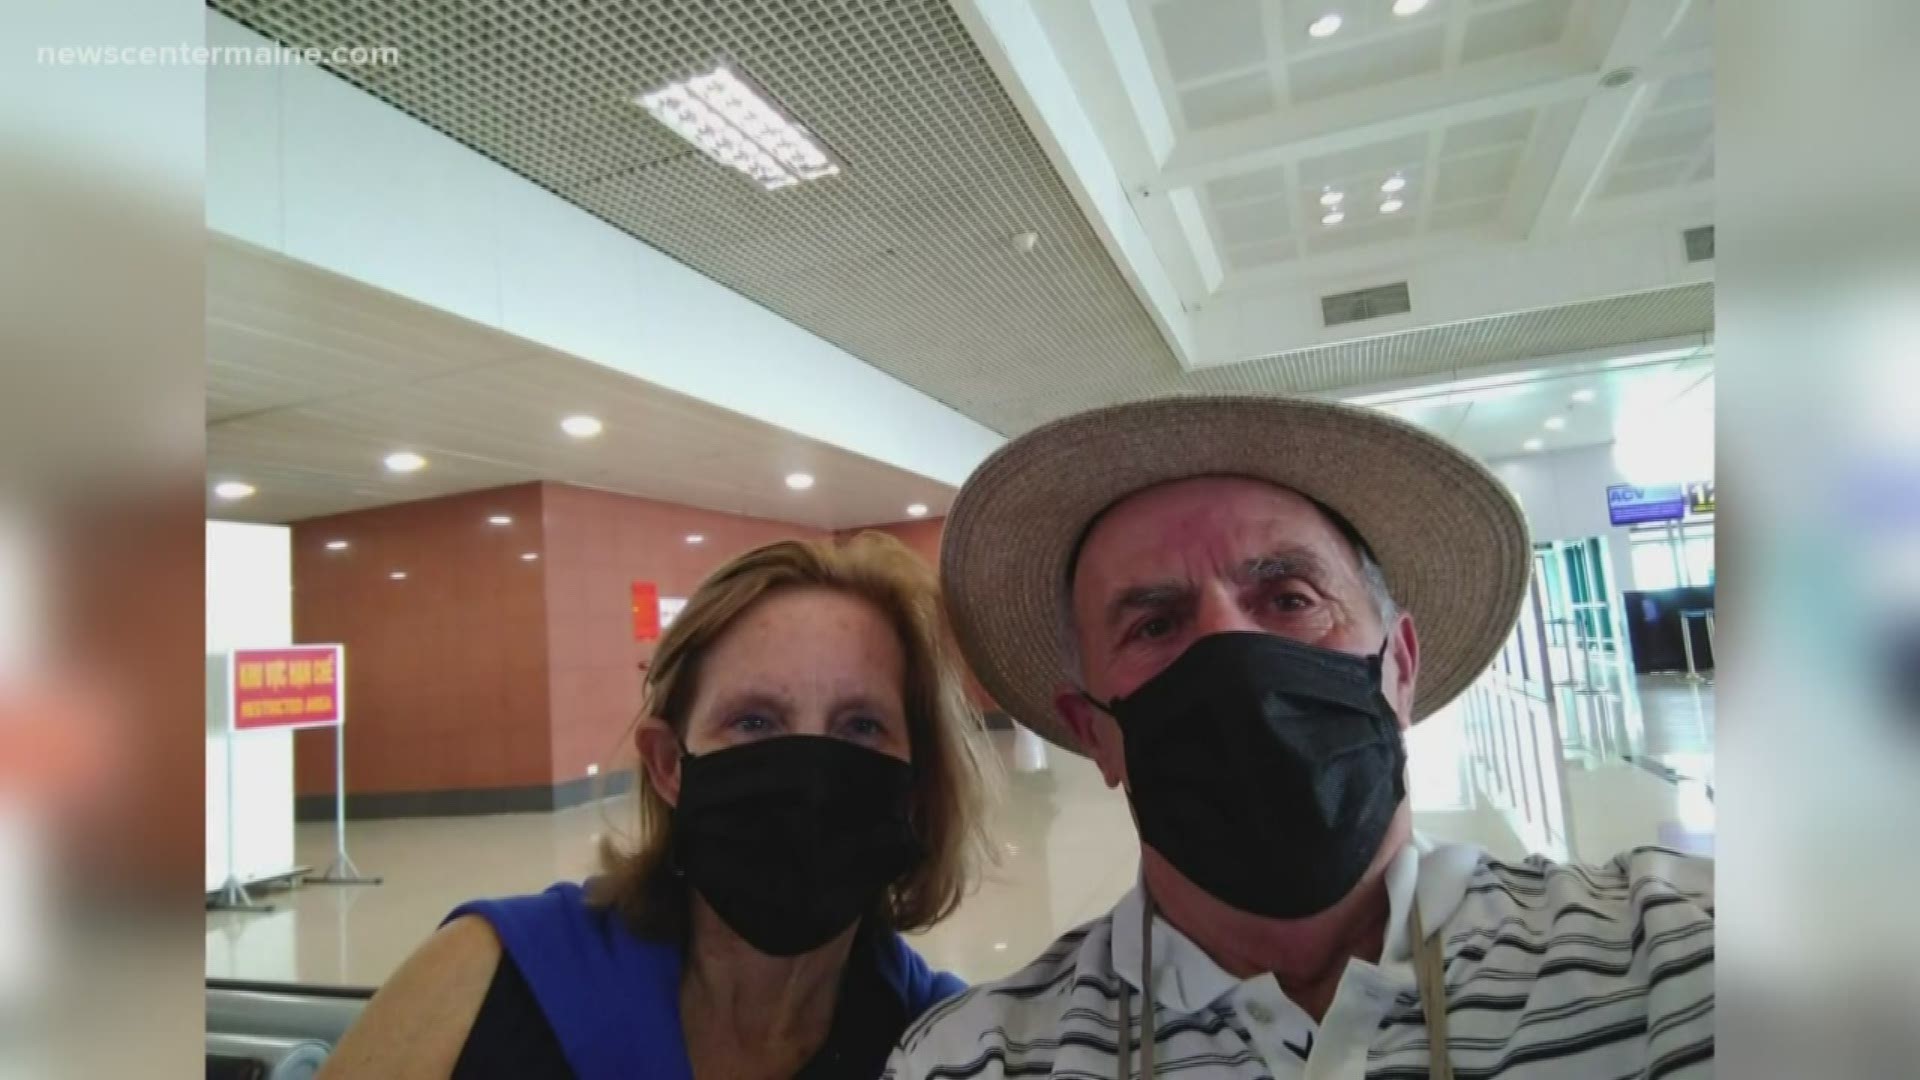 A trip across the world took a turn for the worst for a couple from Cumberland. Coronavirus concerns caused the passengers of their flight to be quarantined.